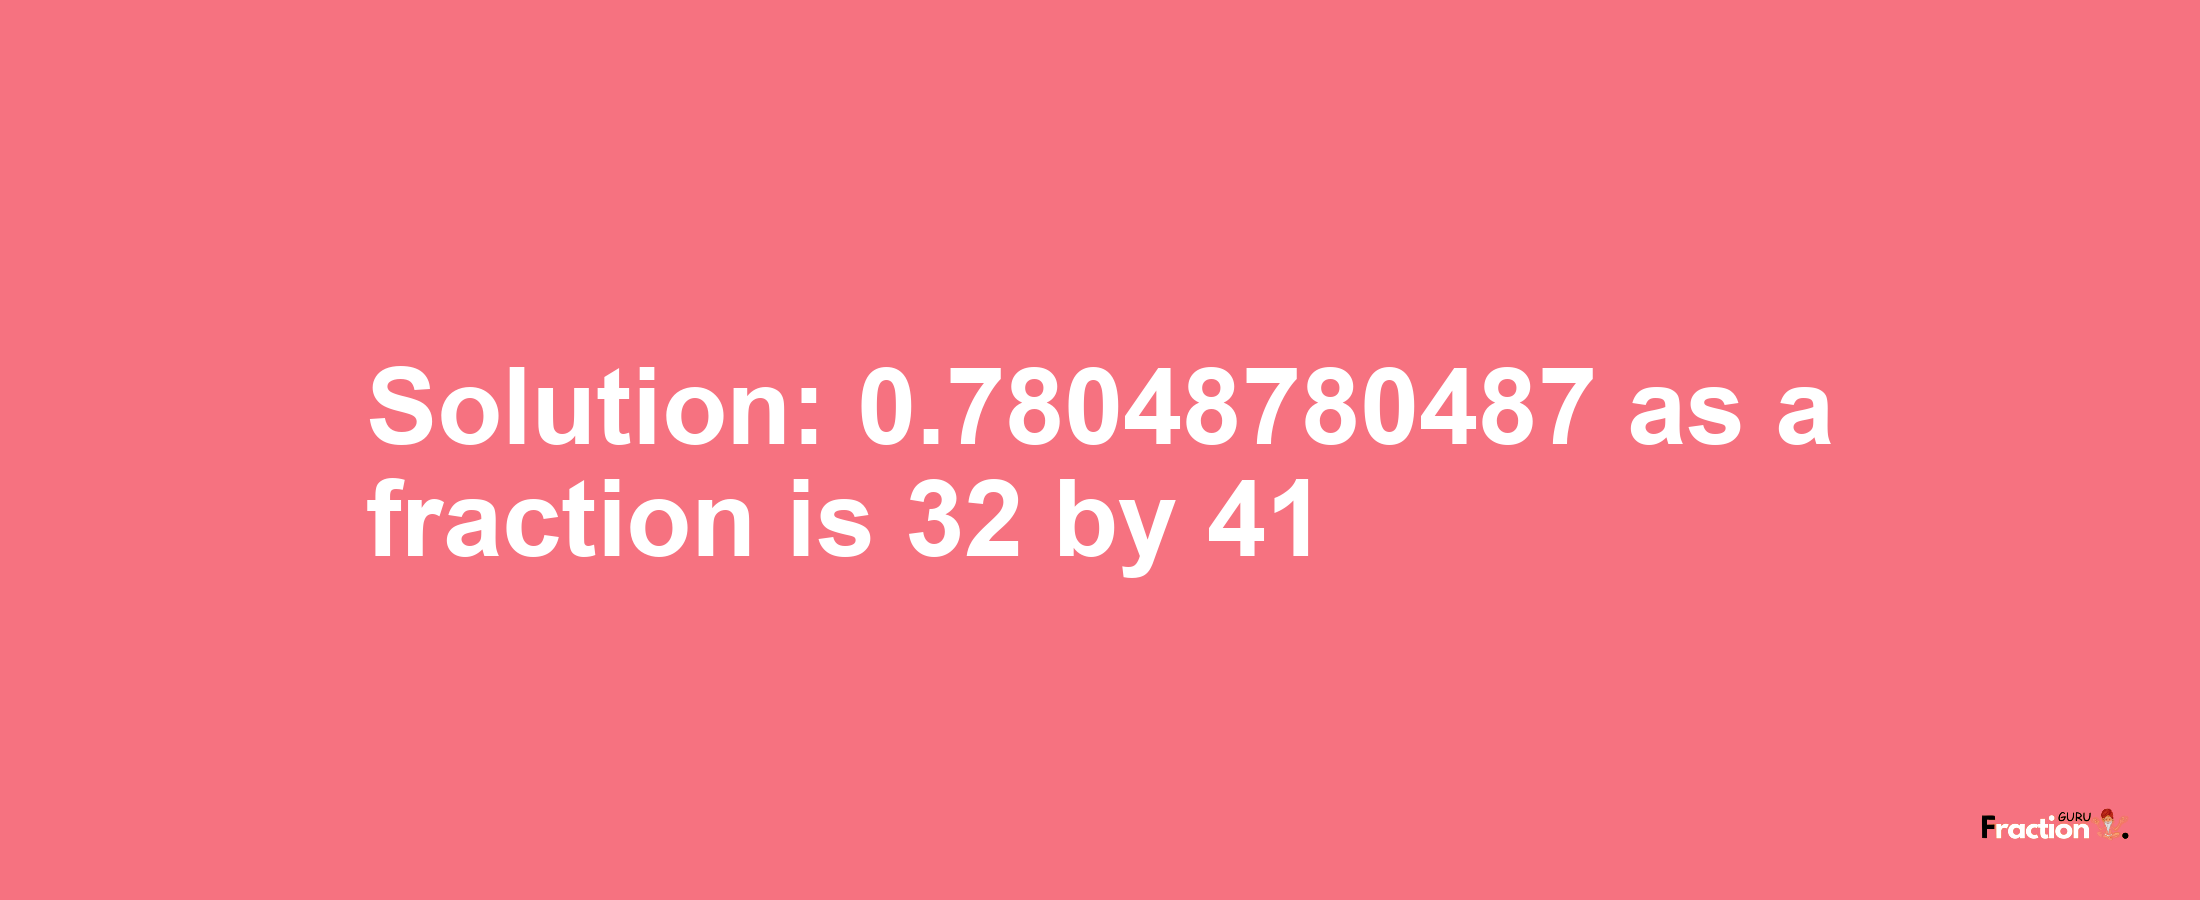 Solution:0.78048780487 as a fraction is 32/41